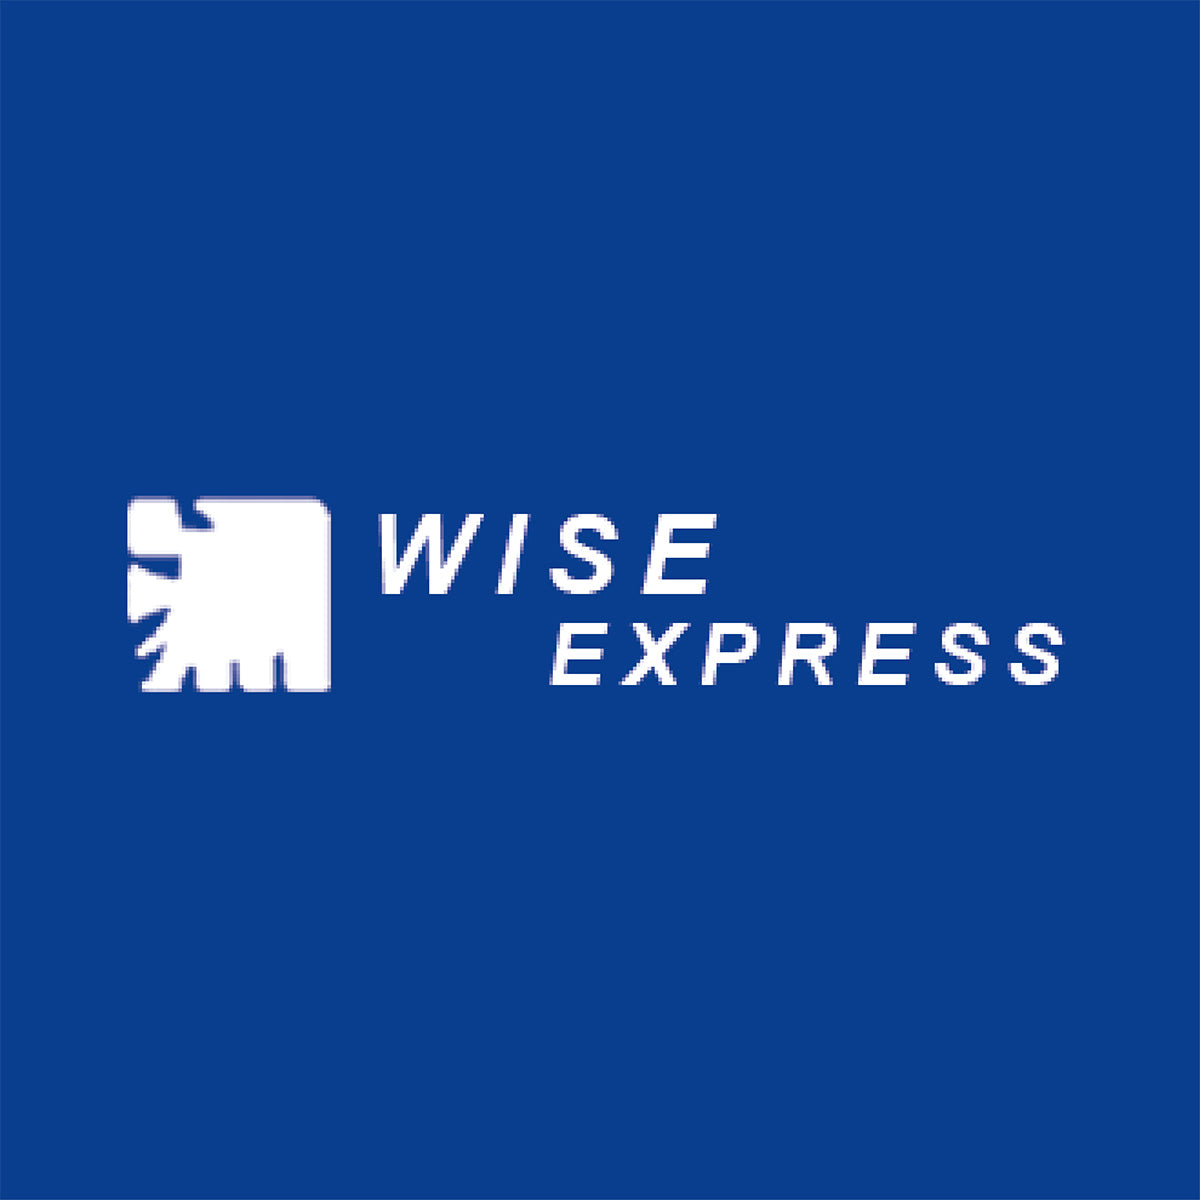 Hire Shopify Experts to integrate WiseExpress app into a Shopify store